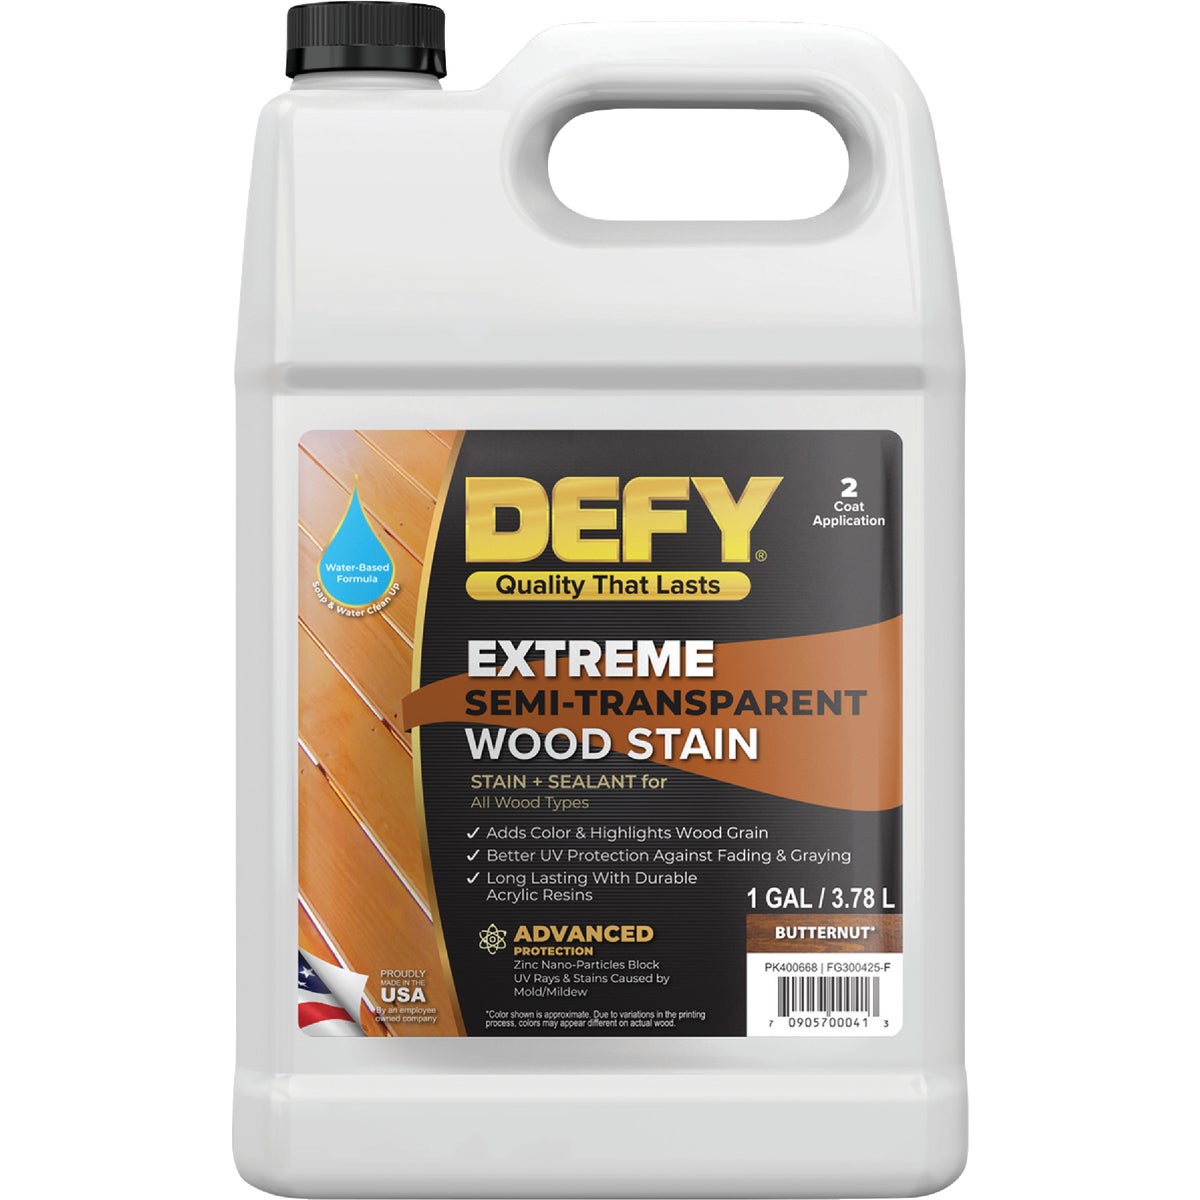 DEFY Extreme Semi-Transparent Exterior Wood Stain, Butternut, 1 Gal. Bottle